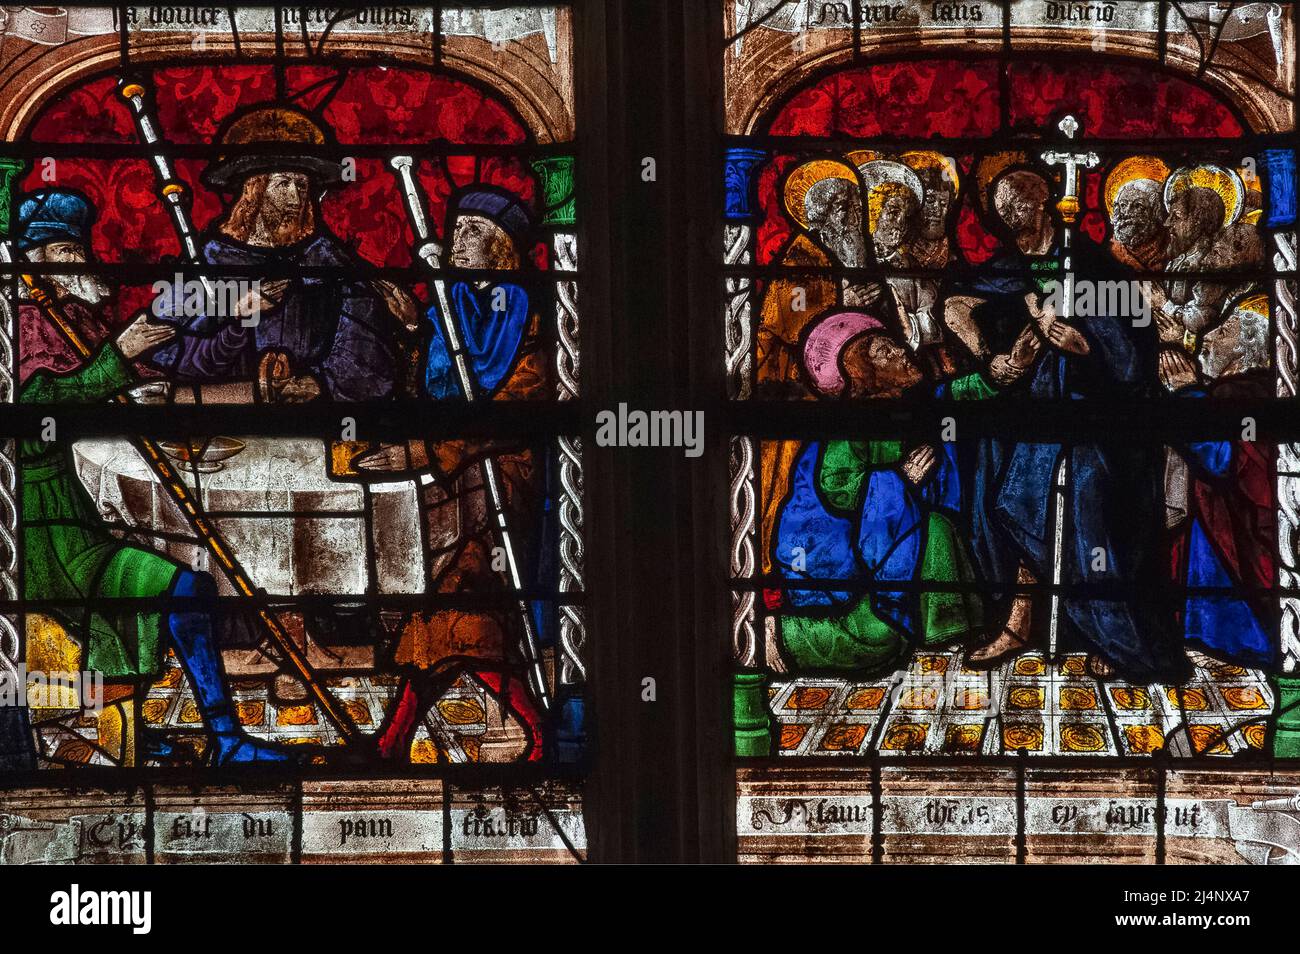 Two panels of vivid 16th century Renaissance stained glass, made by the master glass artists of the city of Troyes in France's Champagne region, depicting Jesus Christ appearing to the Apostles after he was crucified and rose from the dead.  The scene is part of the Resurrection window in the church of St Remy in the village of Ceffonds. Stock Photo